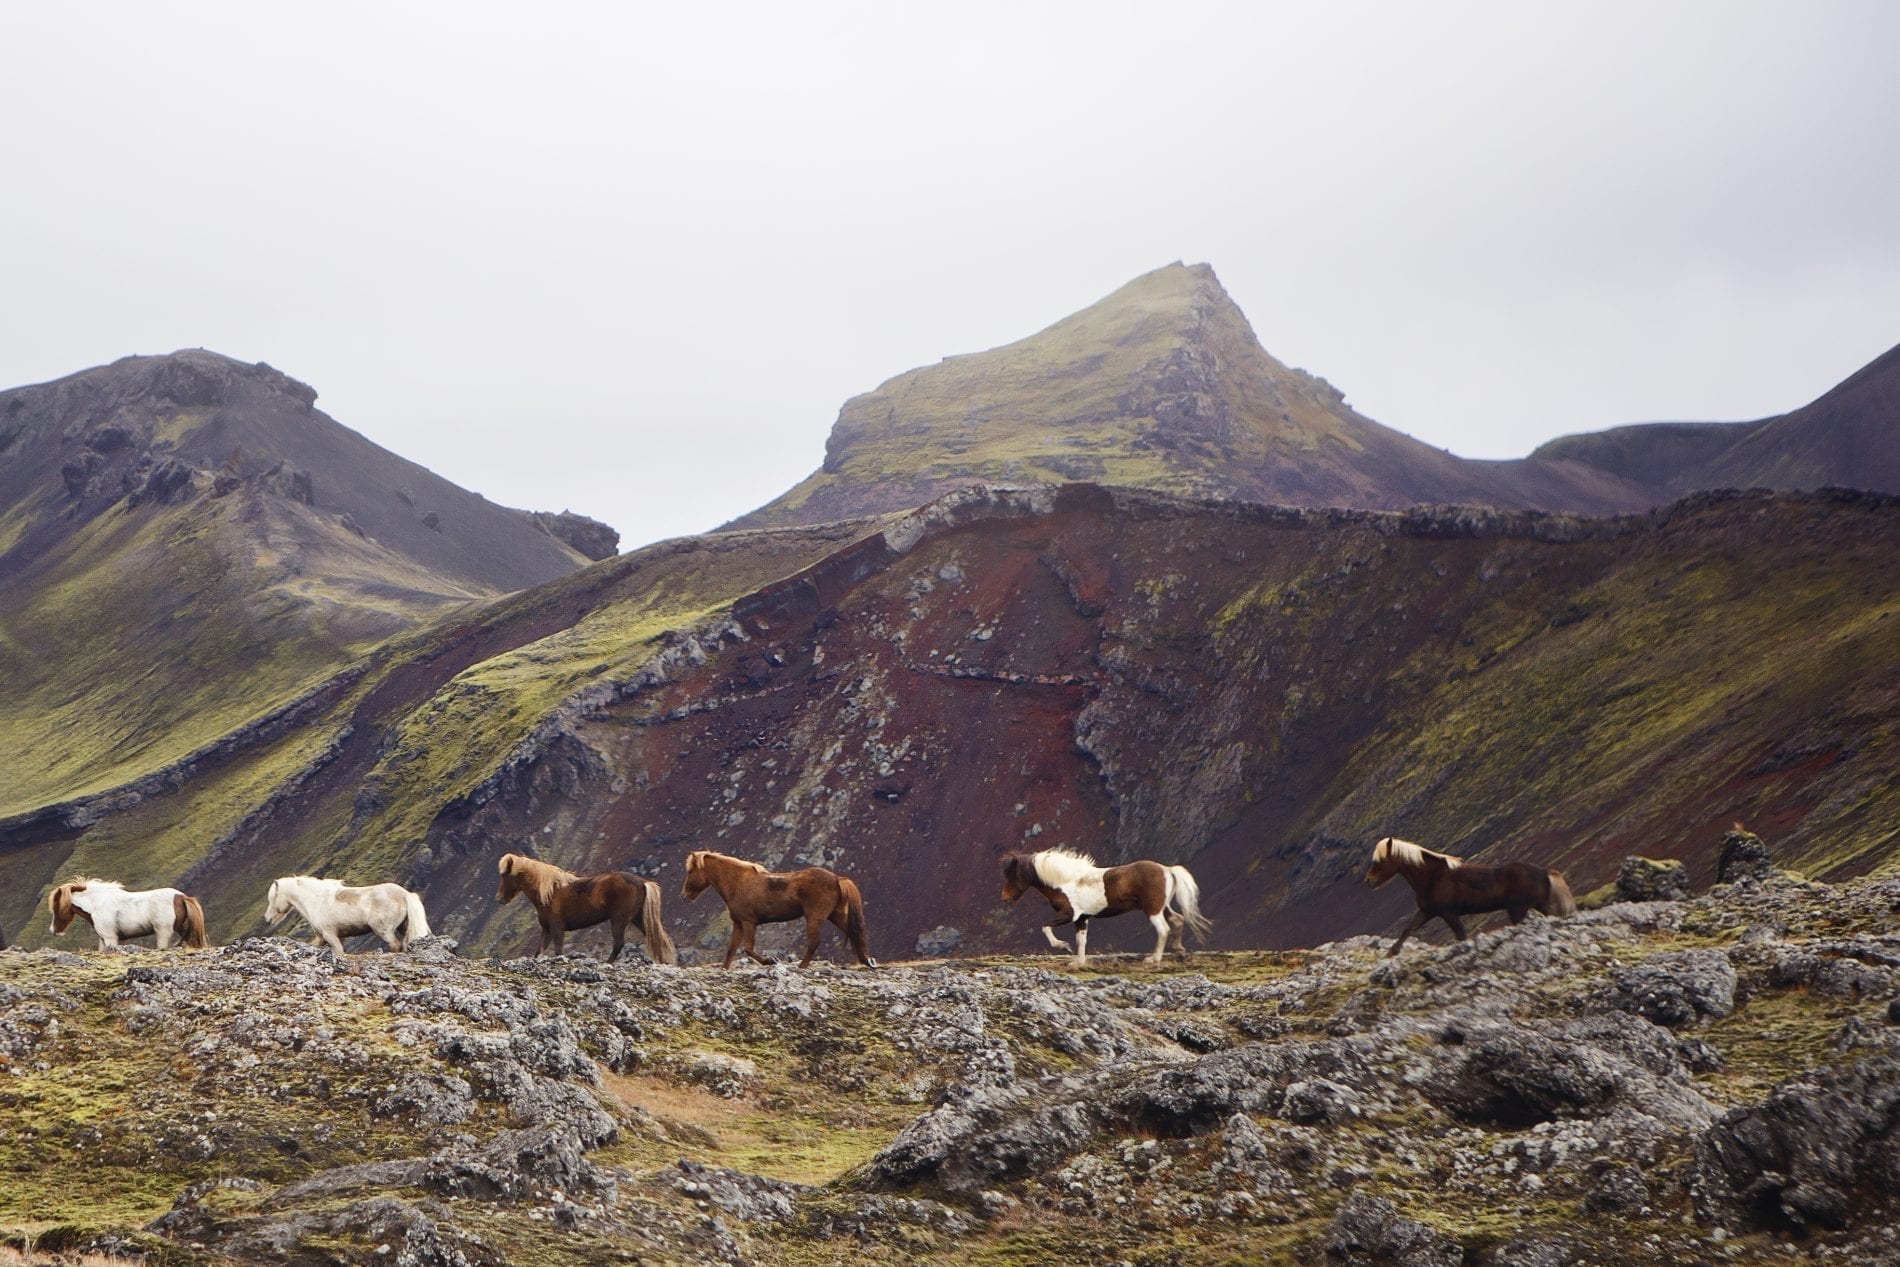 Horses walking near the gorgeous red crater and lake Ljótipollur